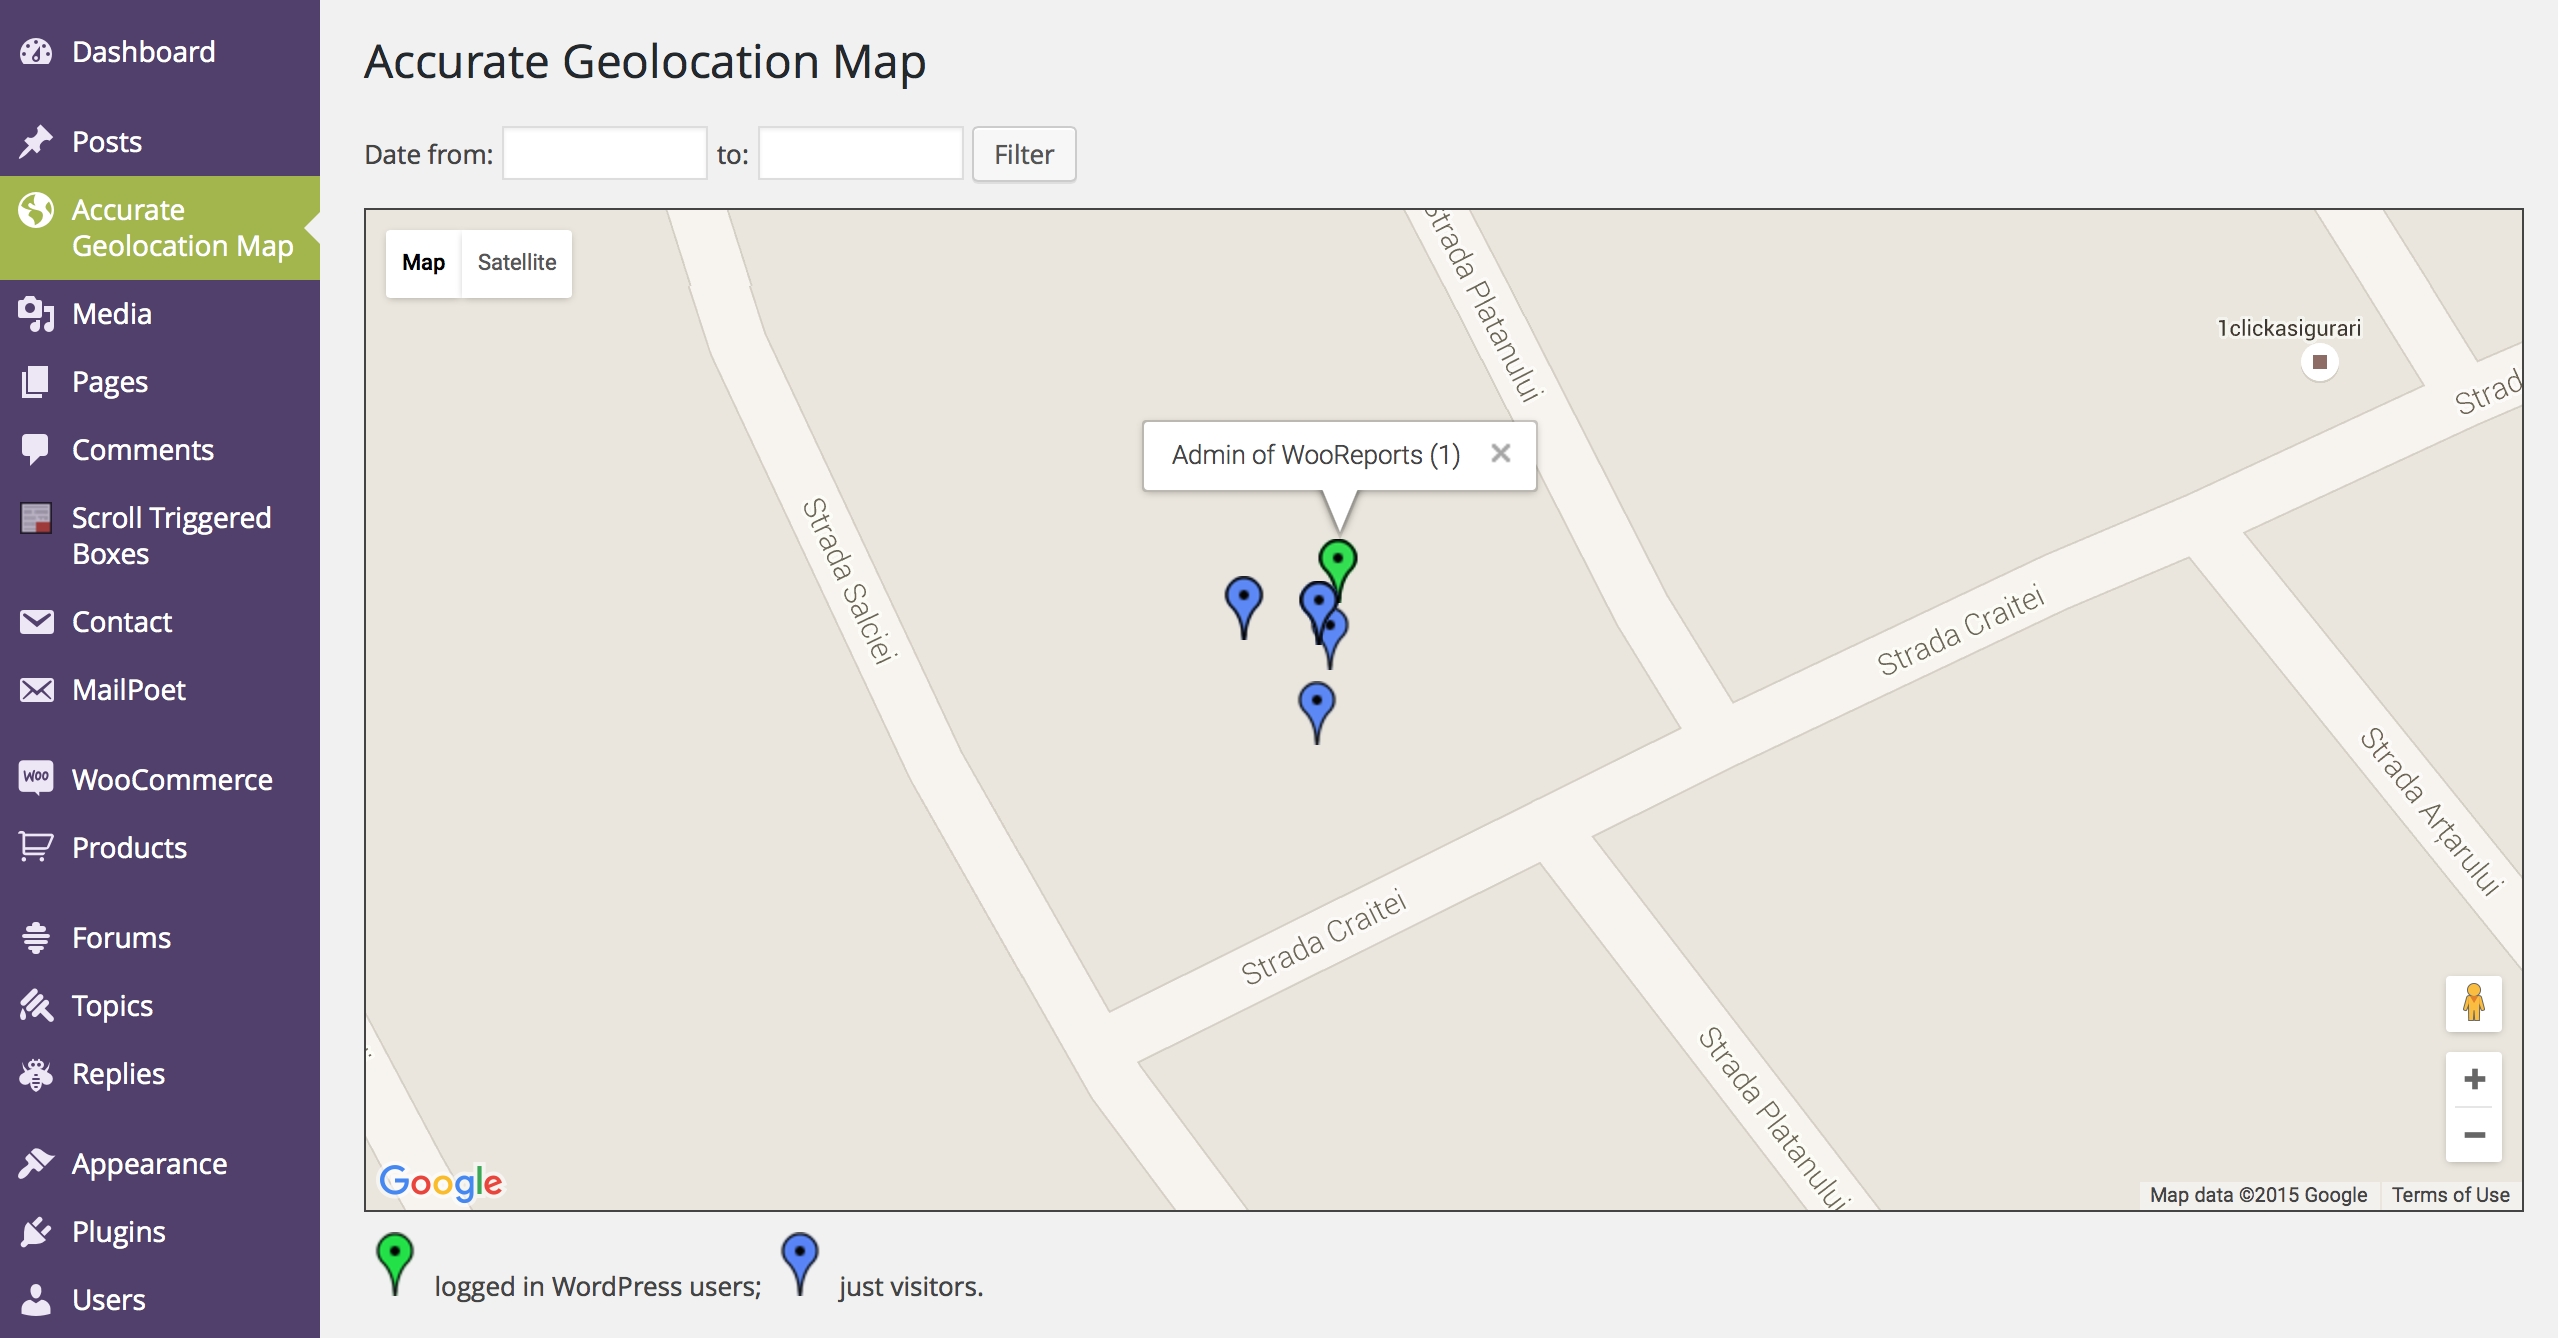 Settings page - HTML5 Geolocation properties